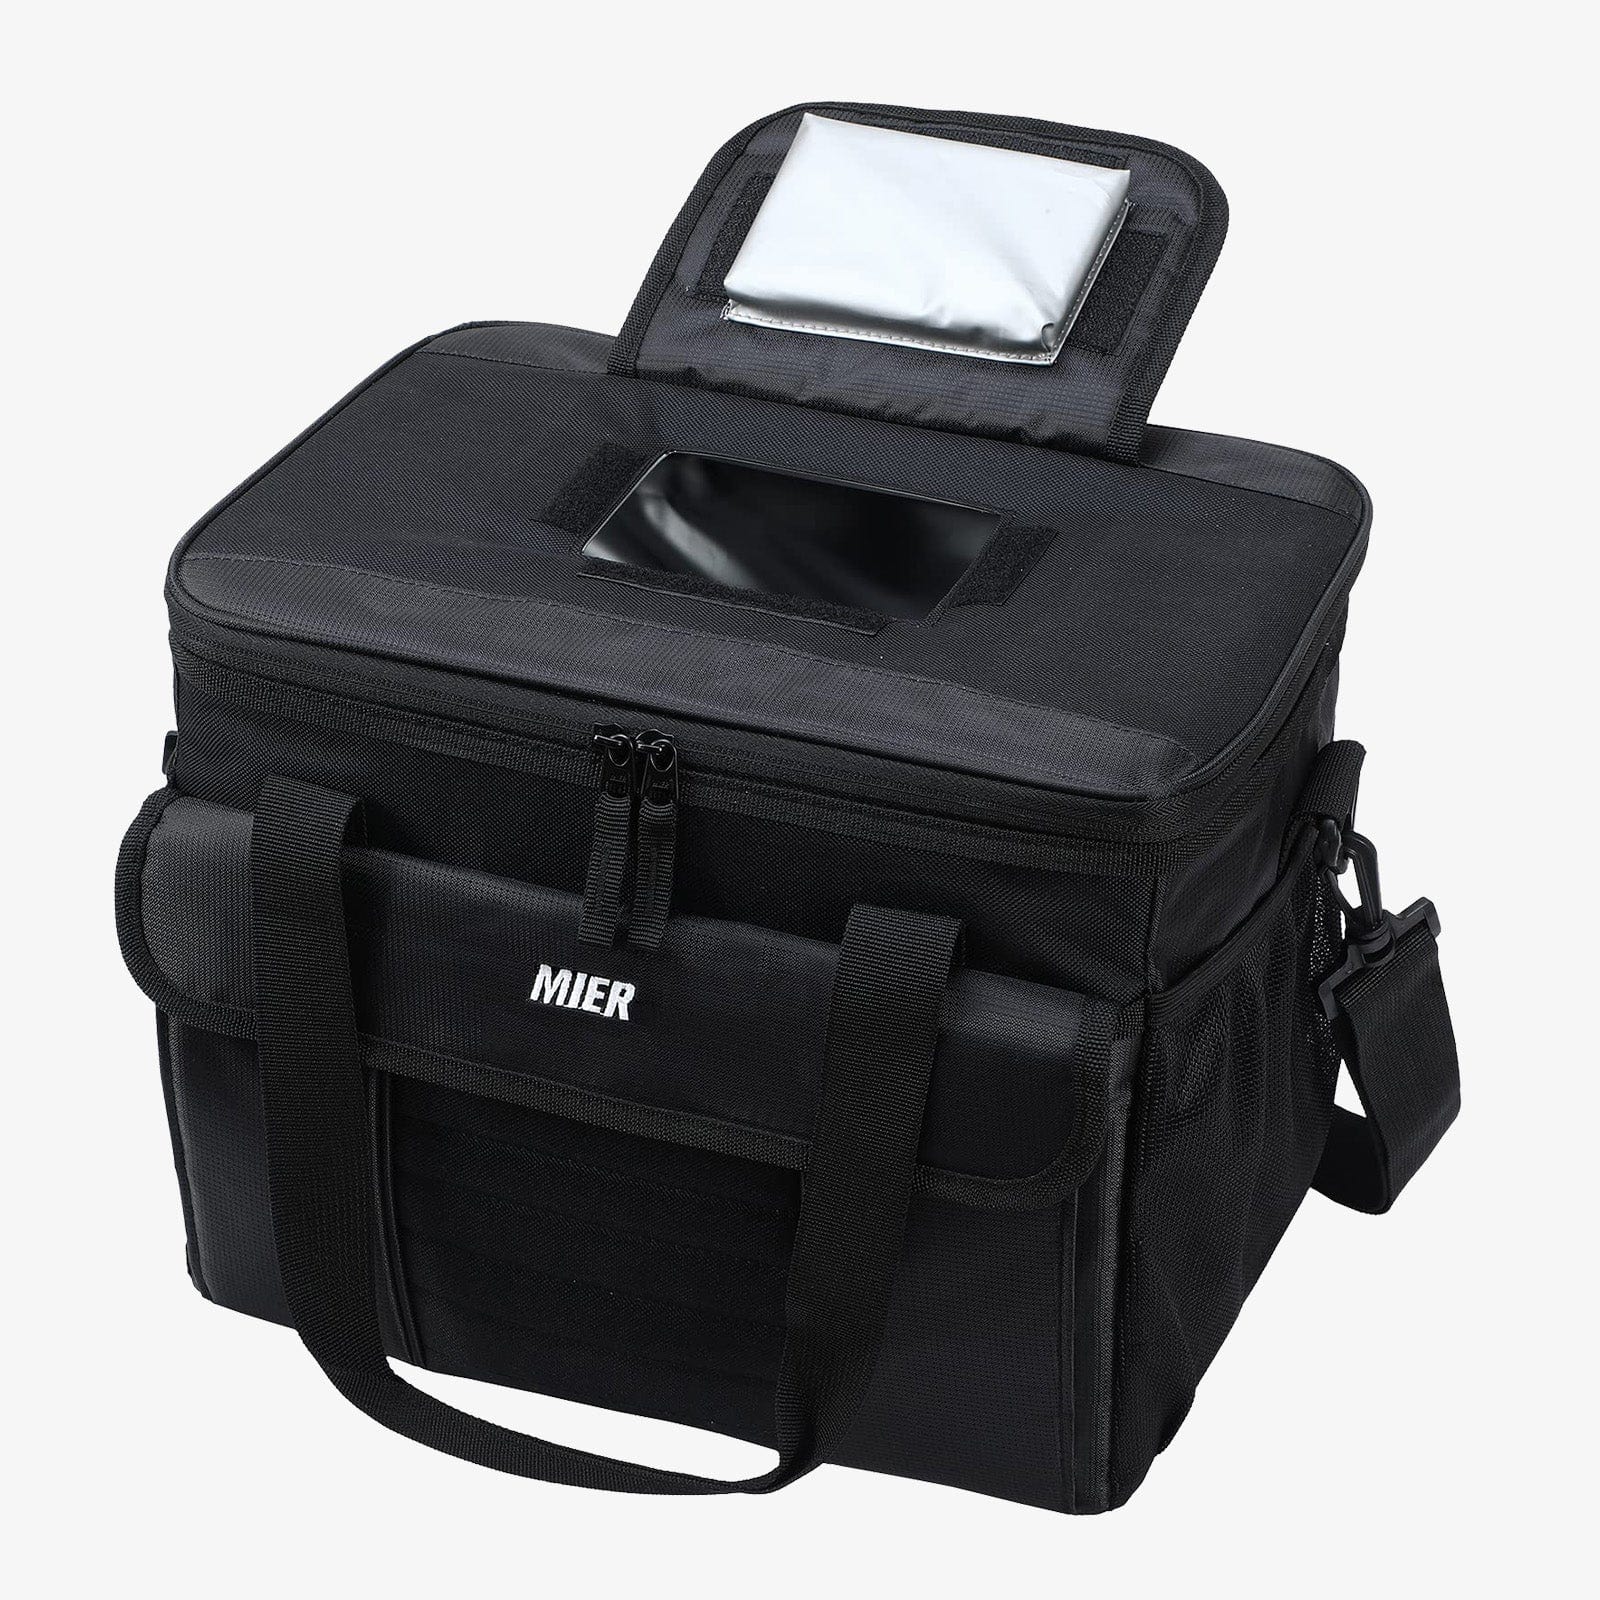 MIER Large Soft Cooler Bag with Dispensing Lid for Picnic, Black / 32 Can